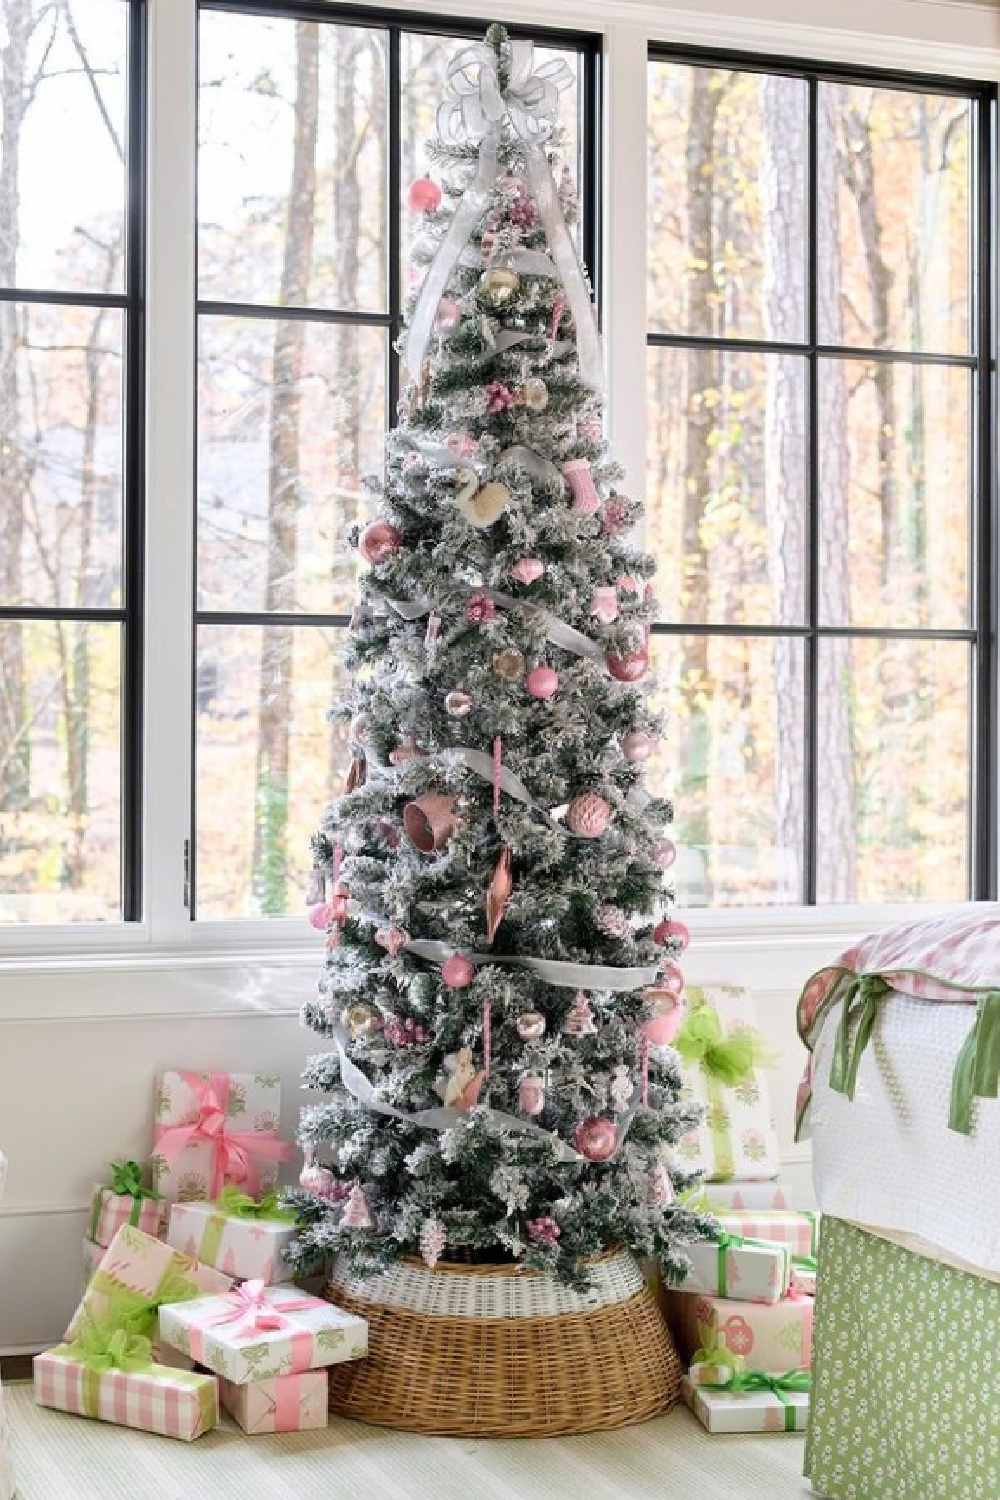 Atlanta Home for the Holidays Designer Showhouse Christmas tree in a glorious room with design by Courtney Giles Interiors. DHC Photo. #christmastreedecorating